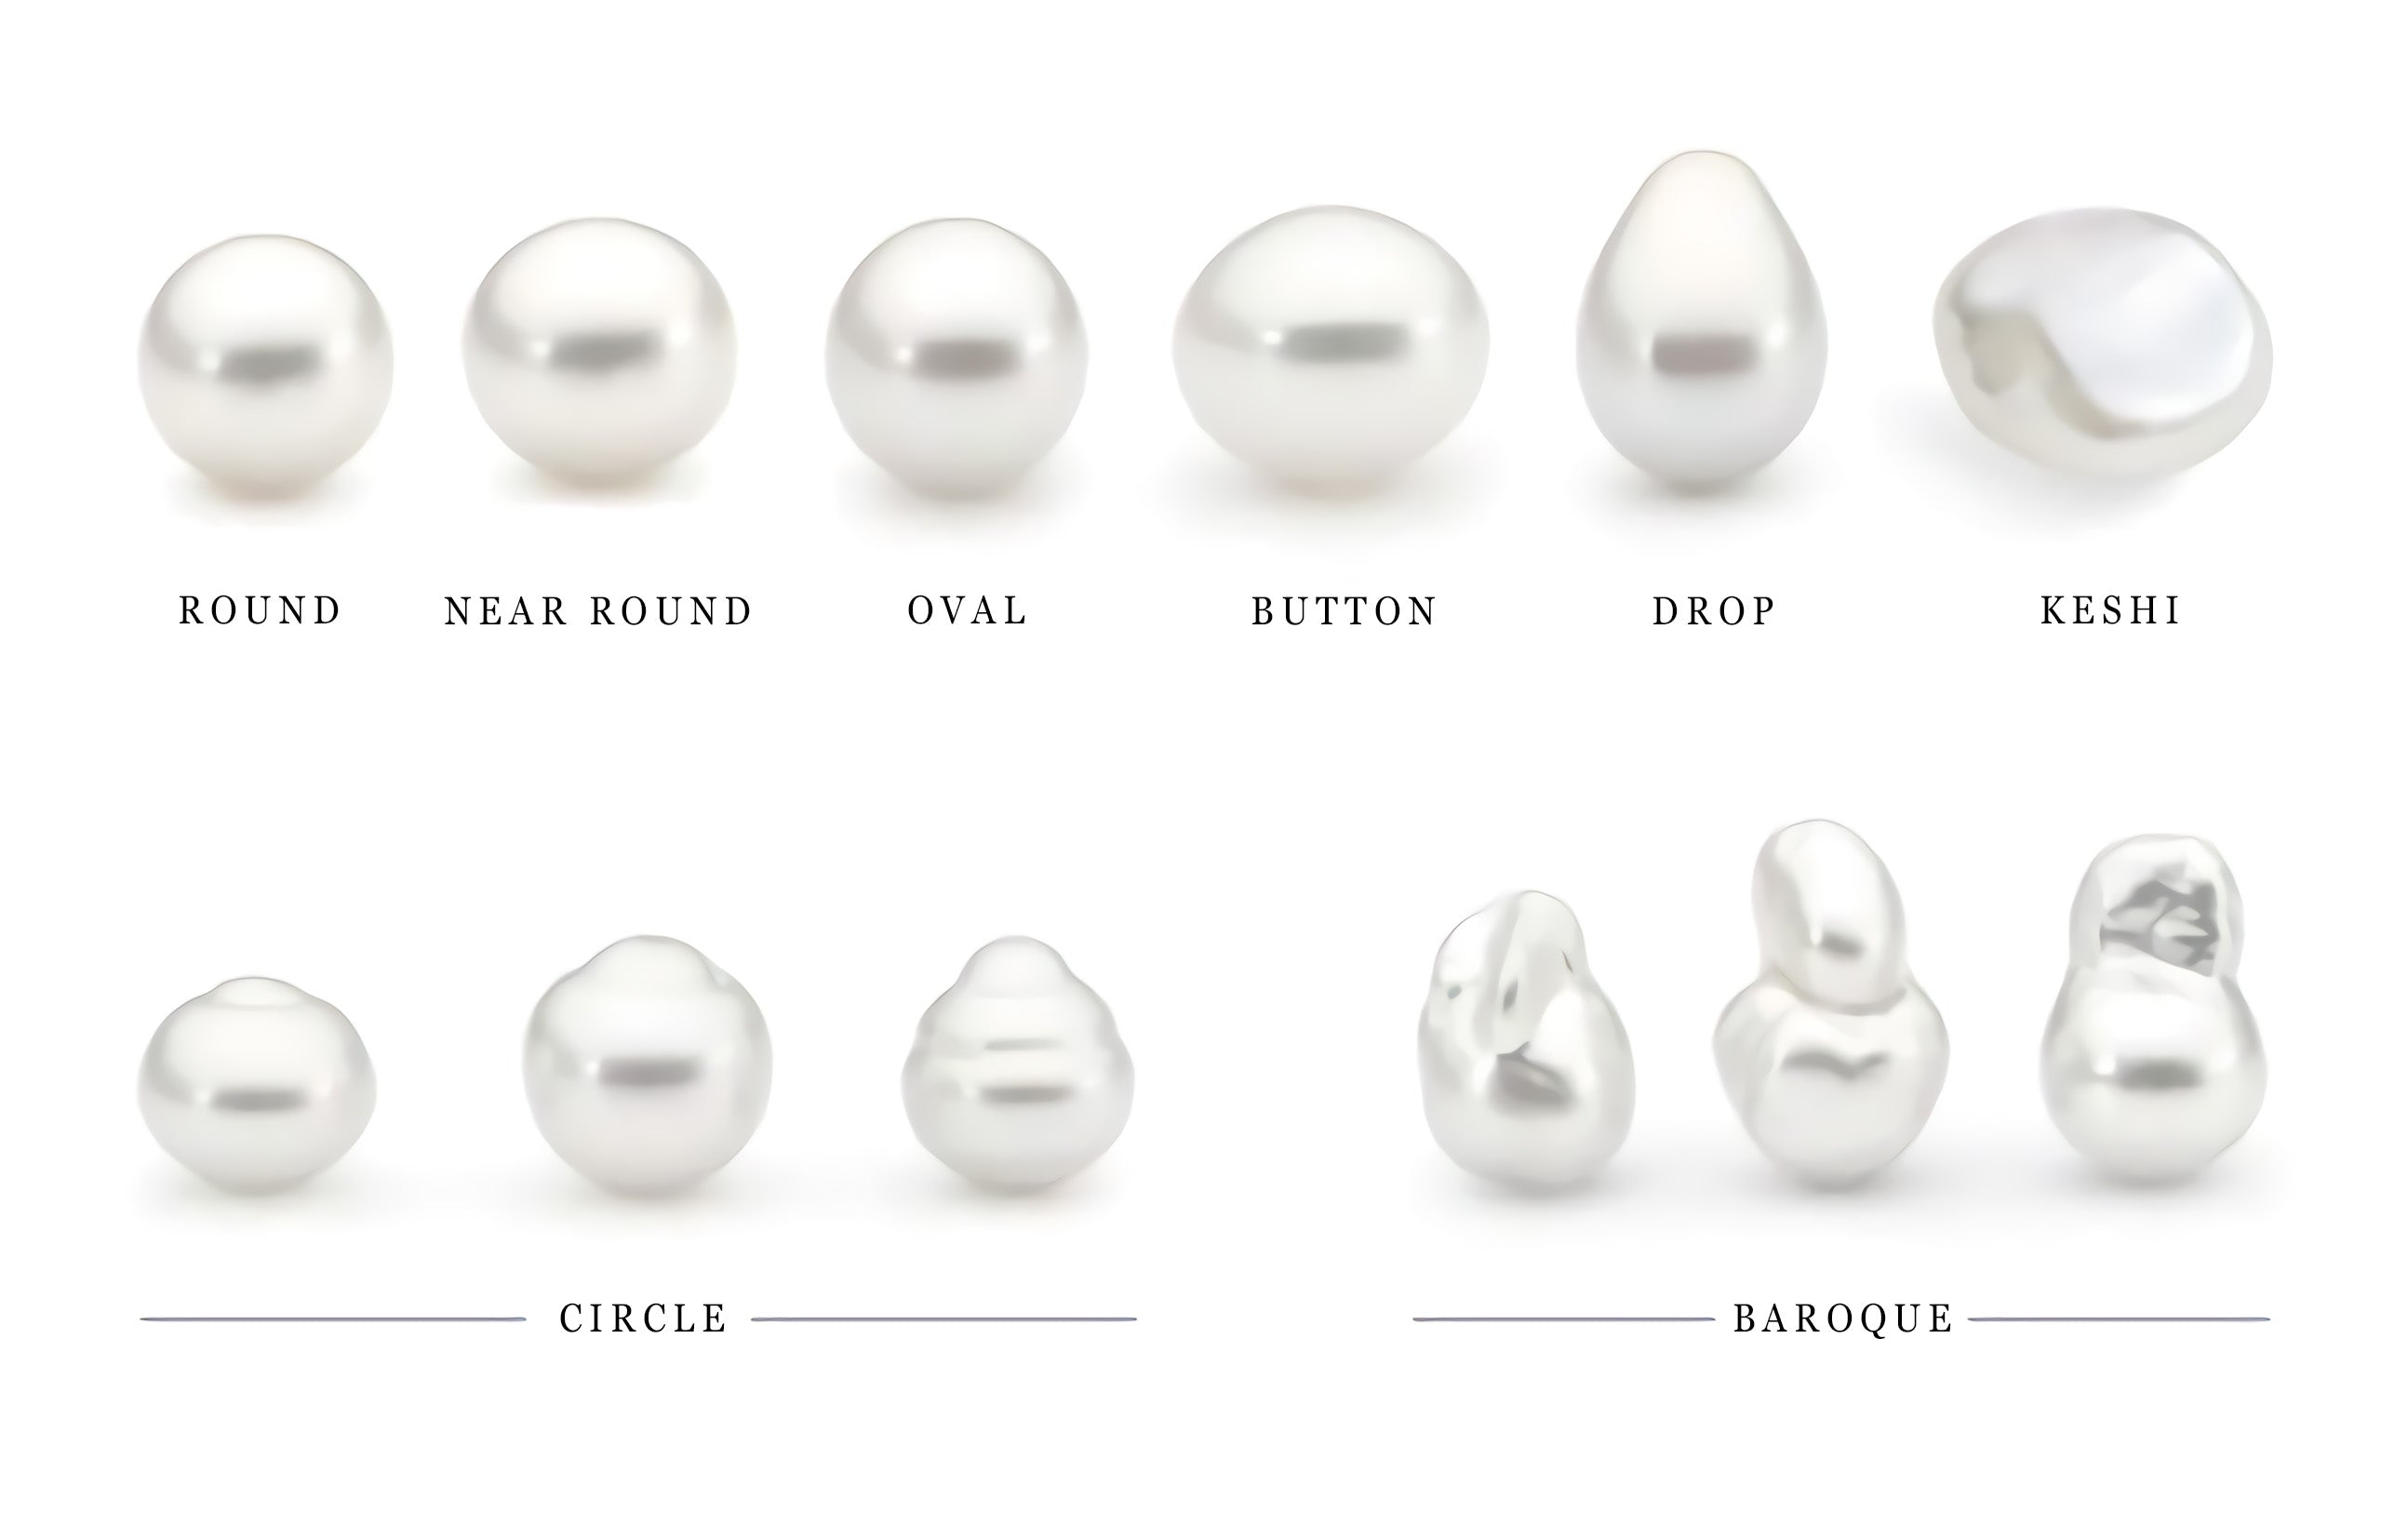 Where Do Freshwater Pearls Come From?